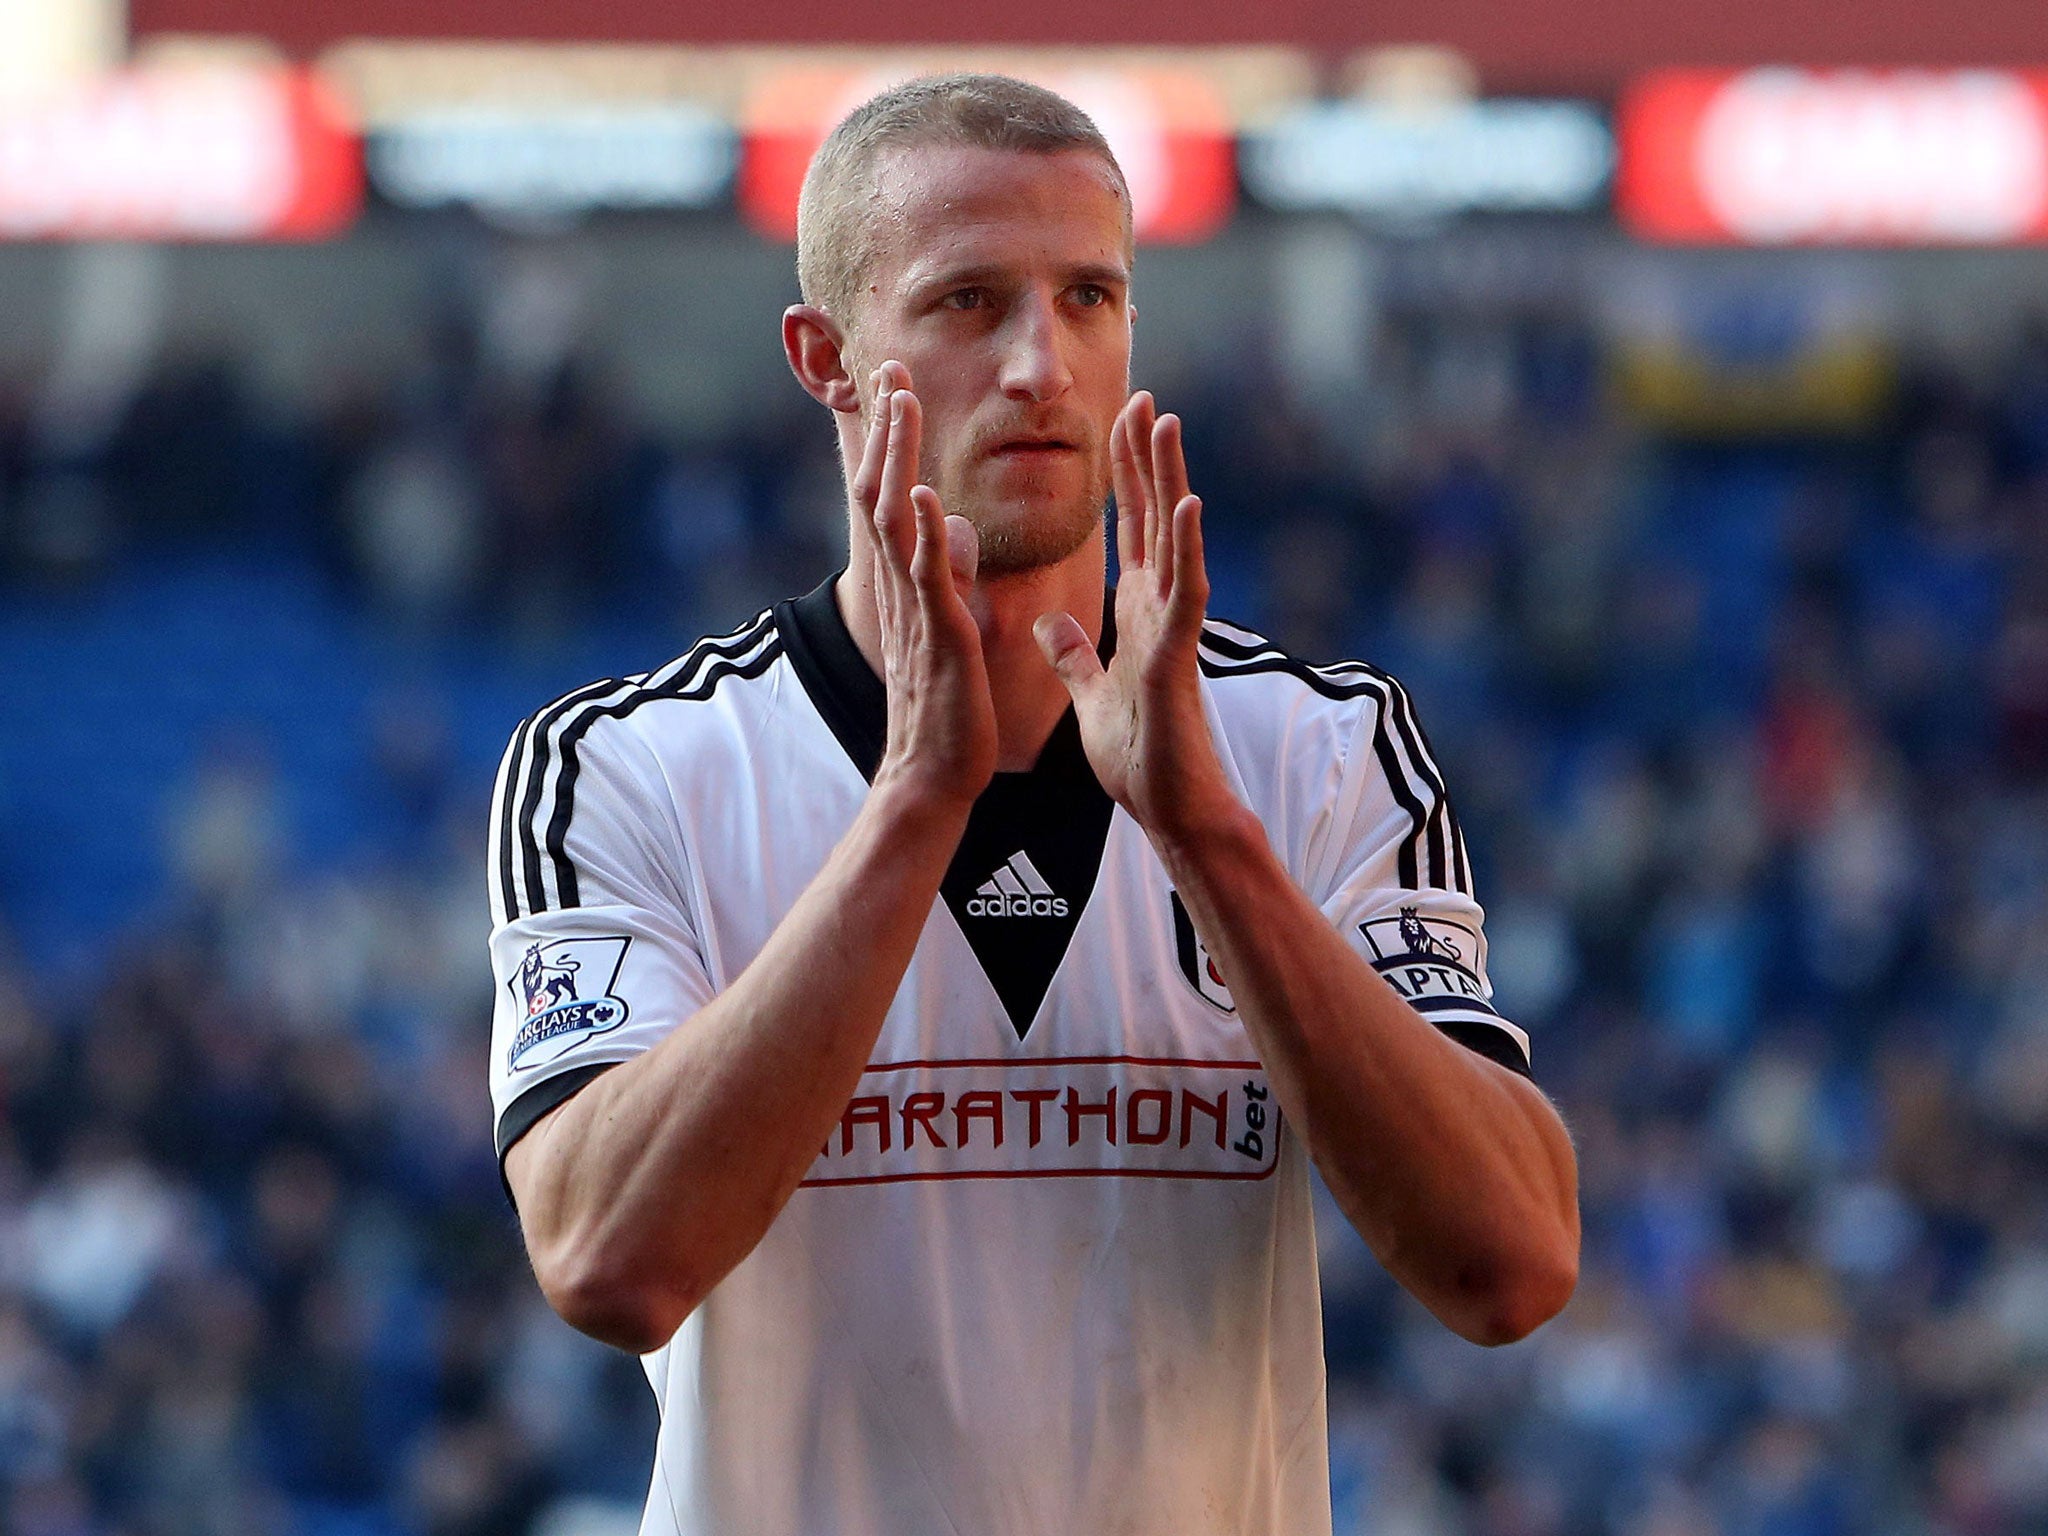 Brede Hangeland applauds supporters following the final whistle